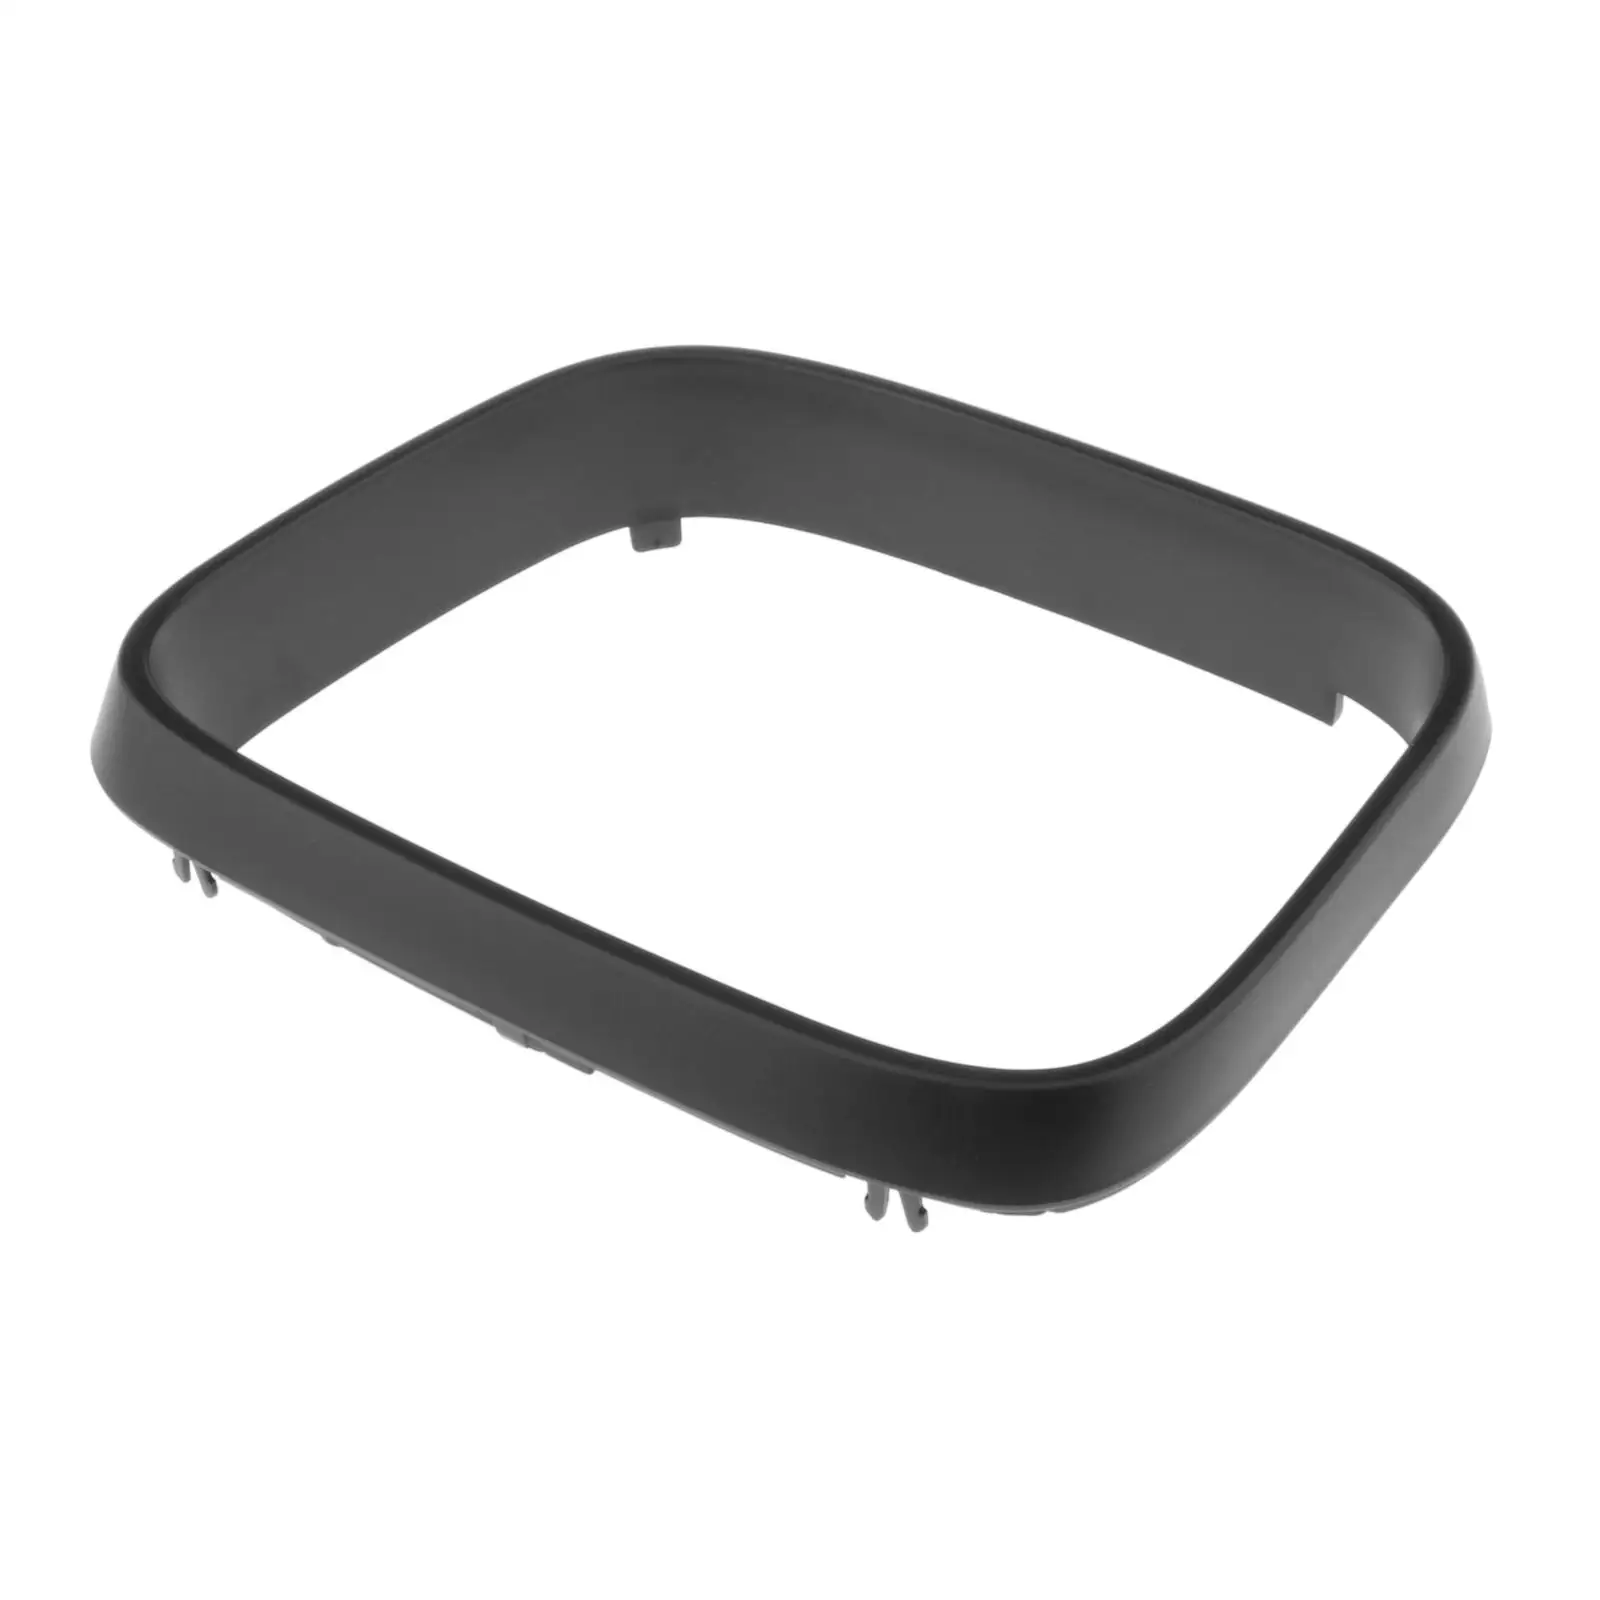 Car Right Mirror Cover Cap for vw T5 2003-2010 and Maxi 2004-Current Car Right Side Mirror Cover